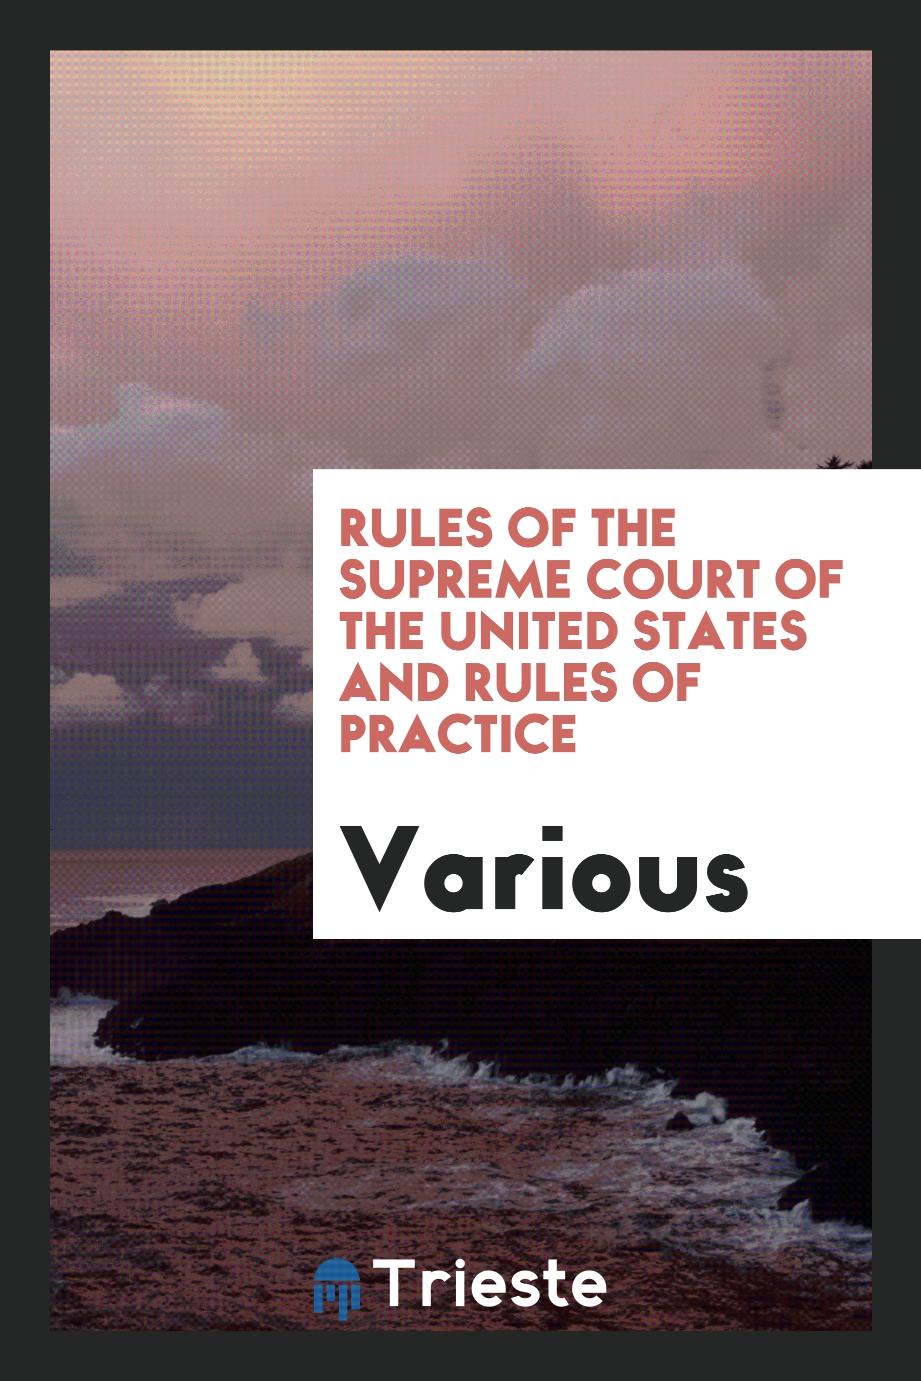 Rules of the Supreme Court of the United States and Rules of Practice